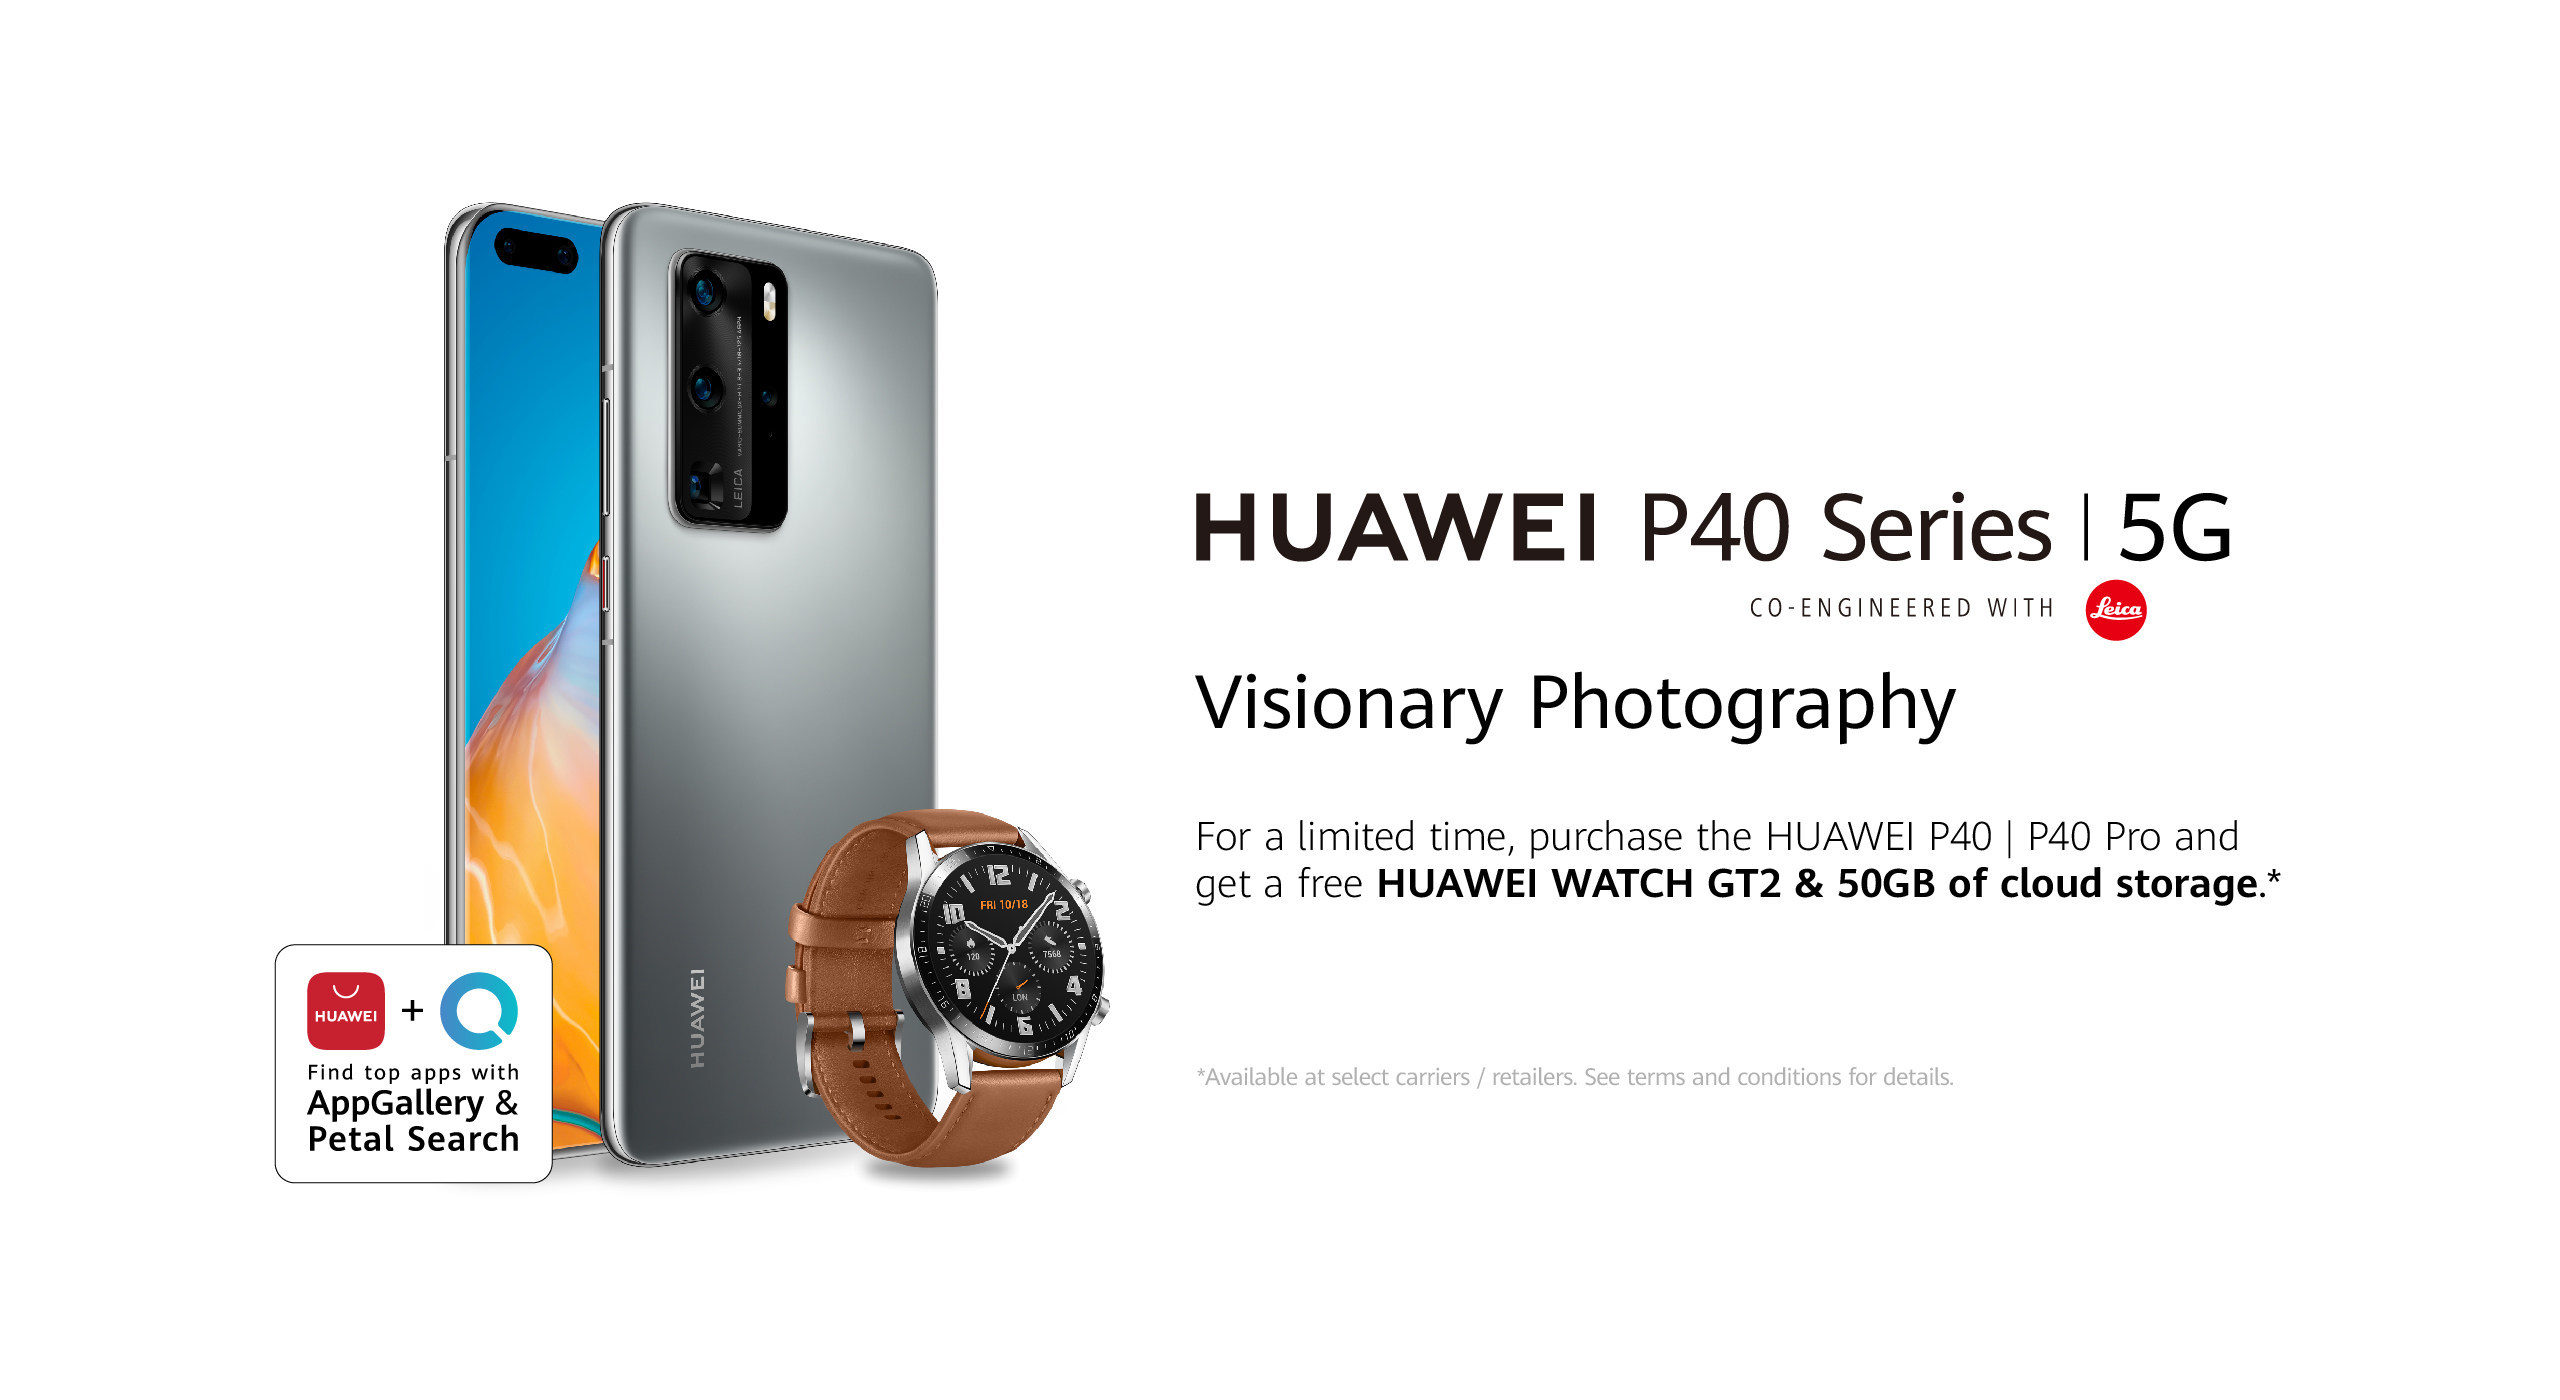 Huawei P40 Series 5g With World S Best Smartphone Camera And The New Huawei Appgallery And Petal Search Now Available In Canada - who stole the cookies pt2 roblox amino